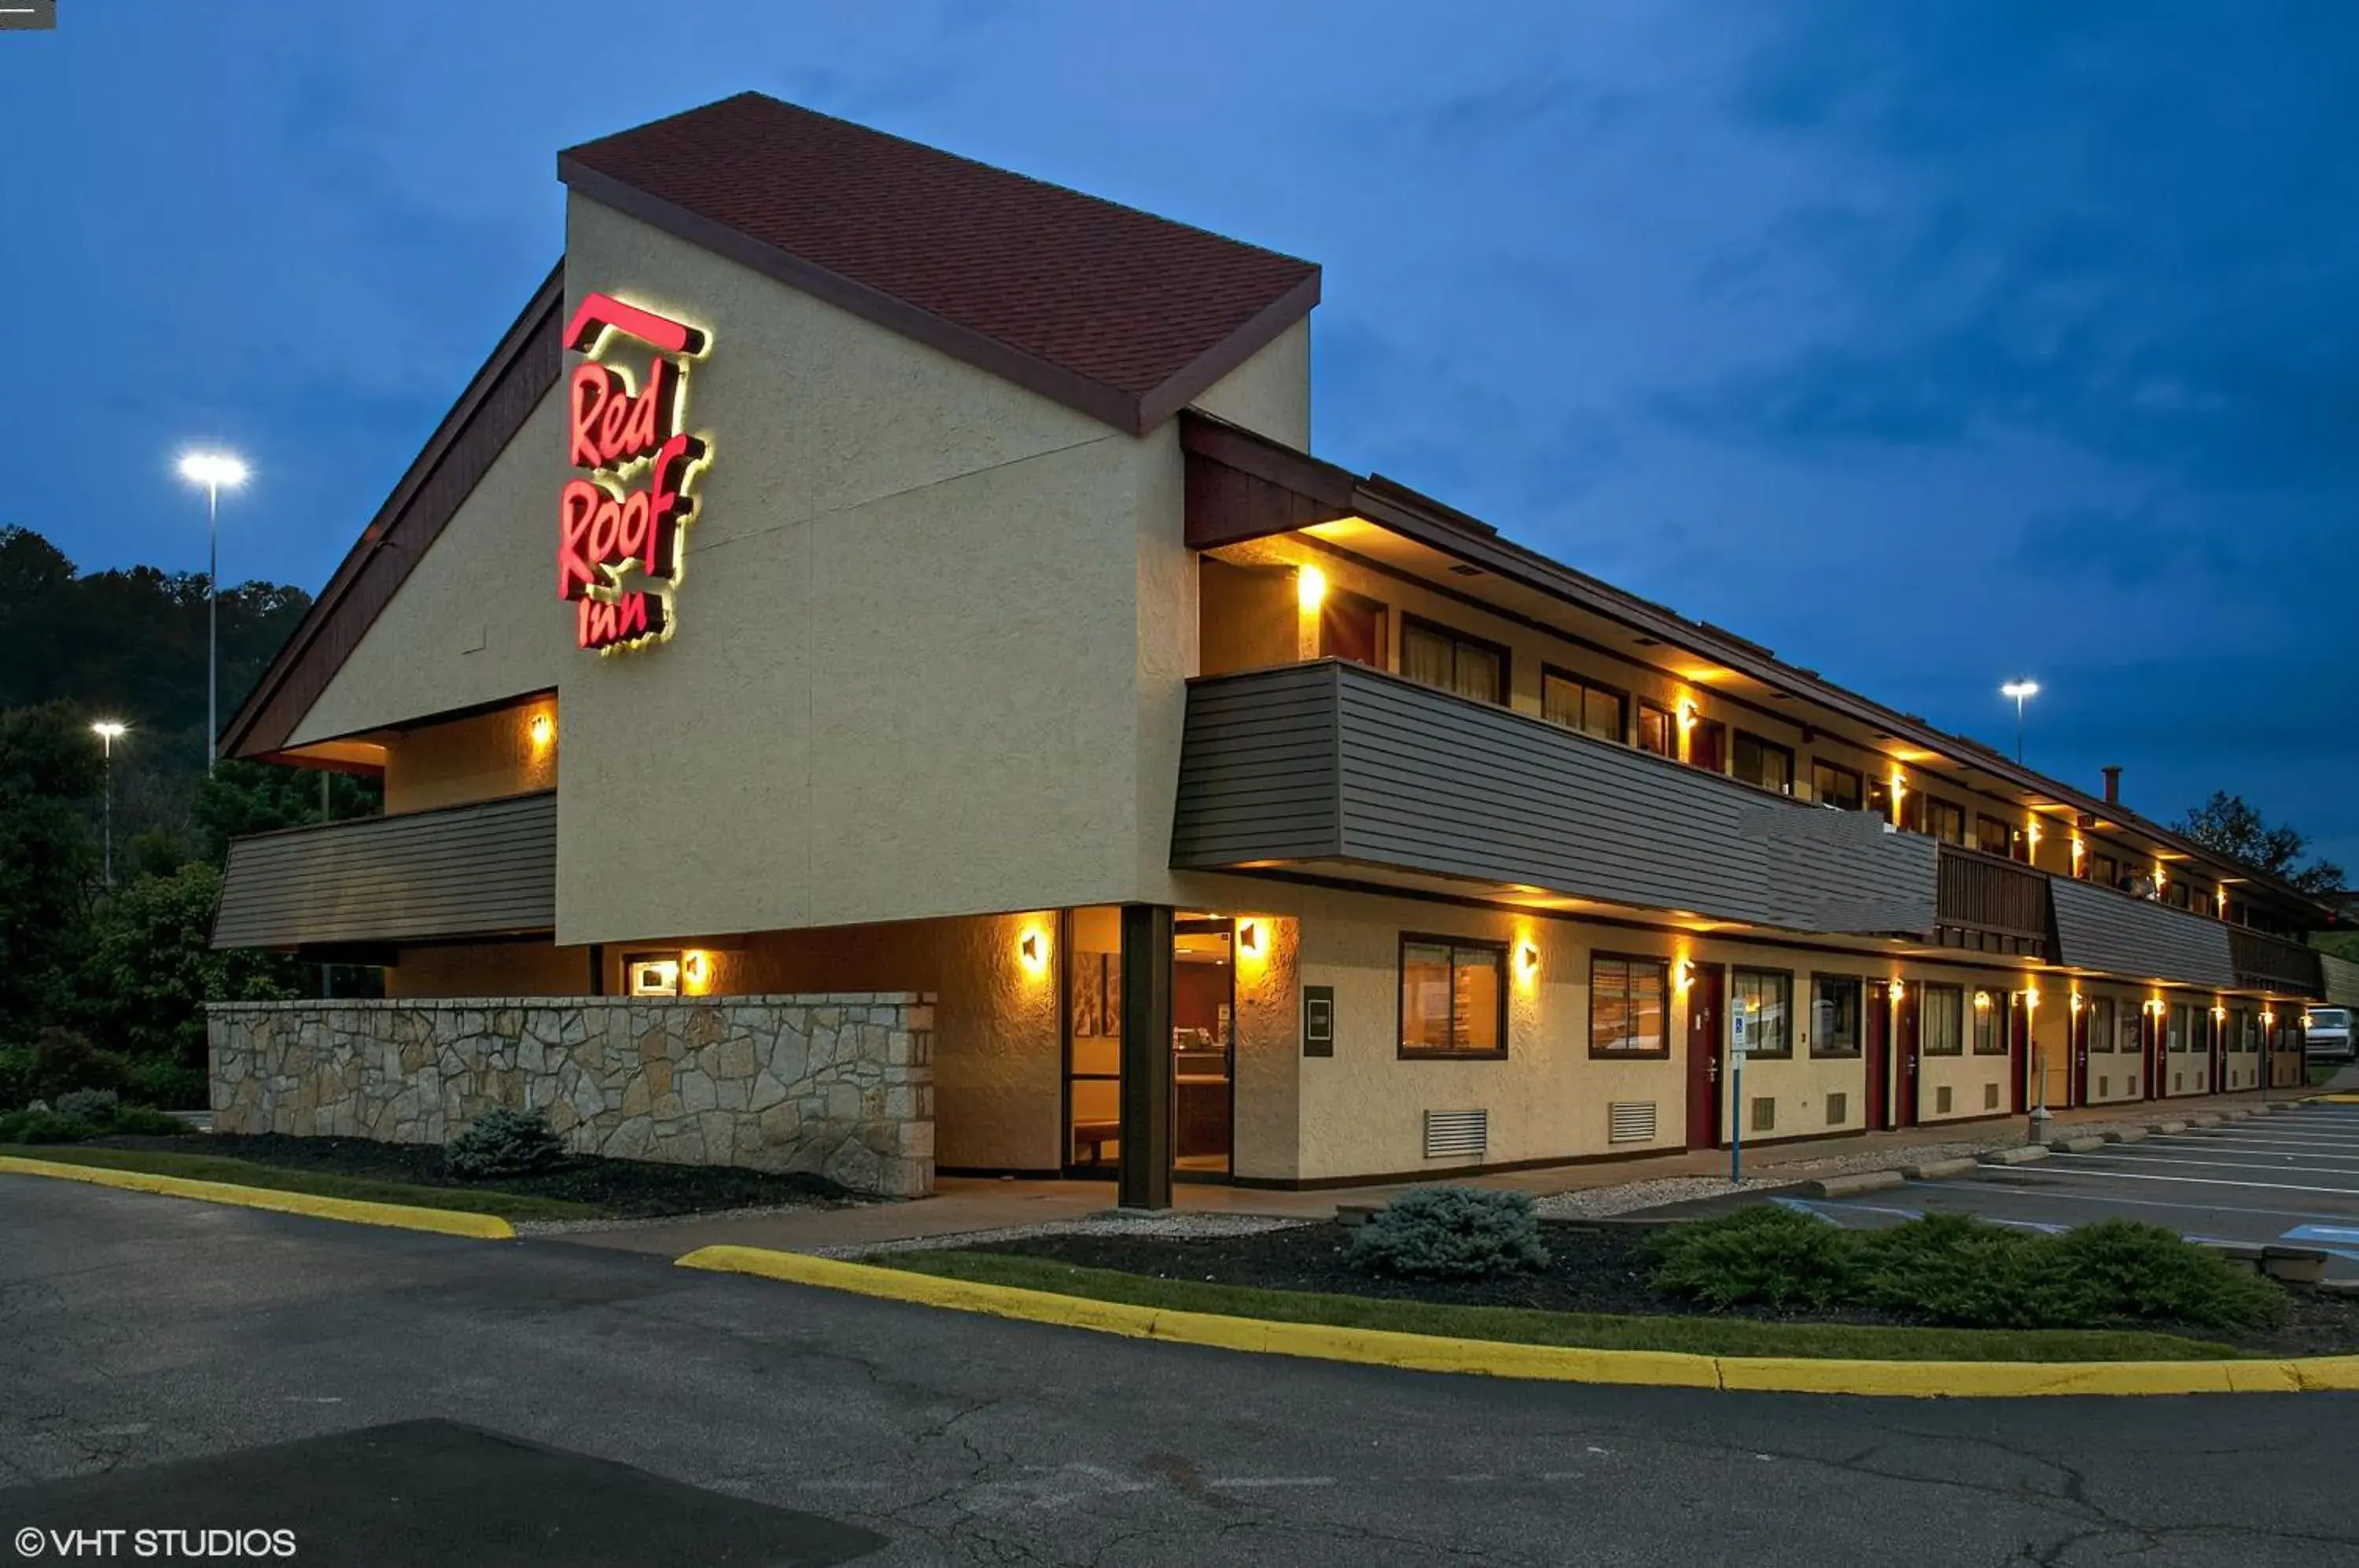 Property Building in Red Roof Inn Charleston - Kanawha City, WV